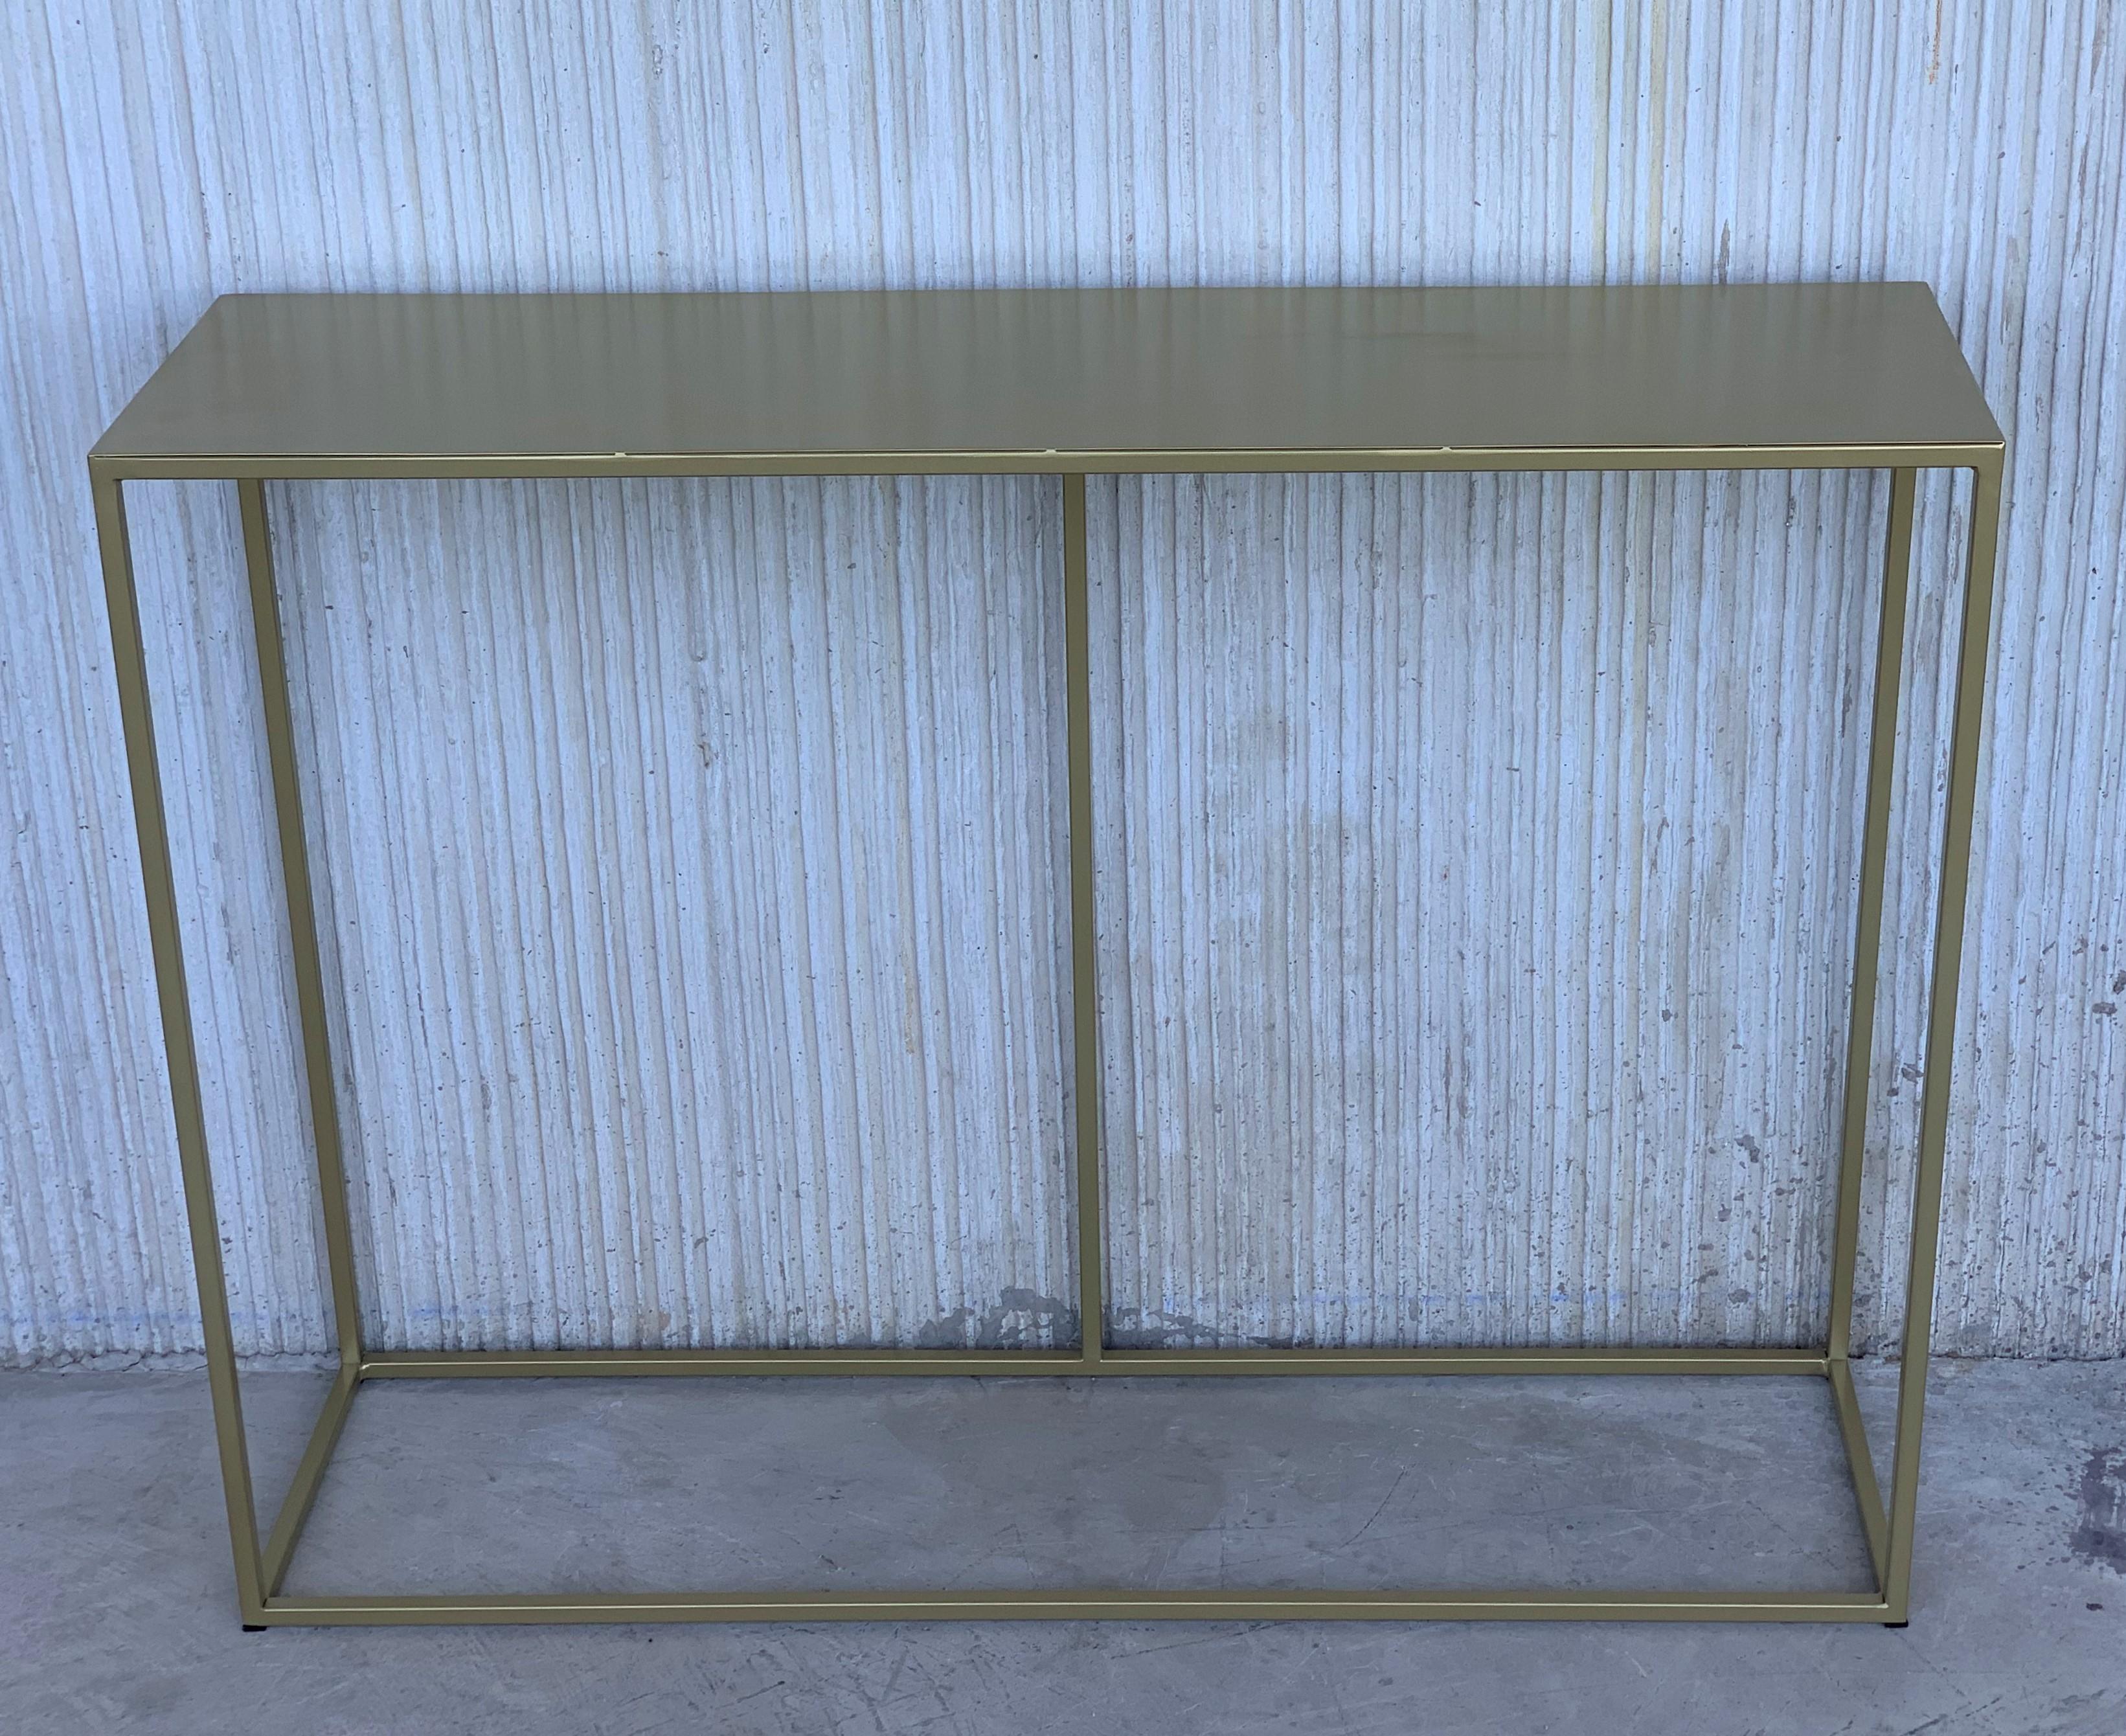 New gilded iron console table with metal top.

Galvanized metal rod shelving with epoxy powder coating.